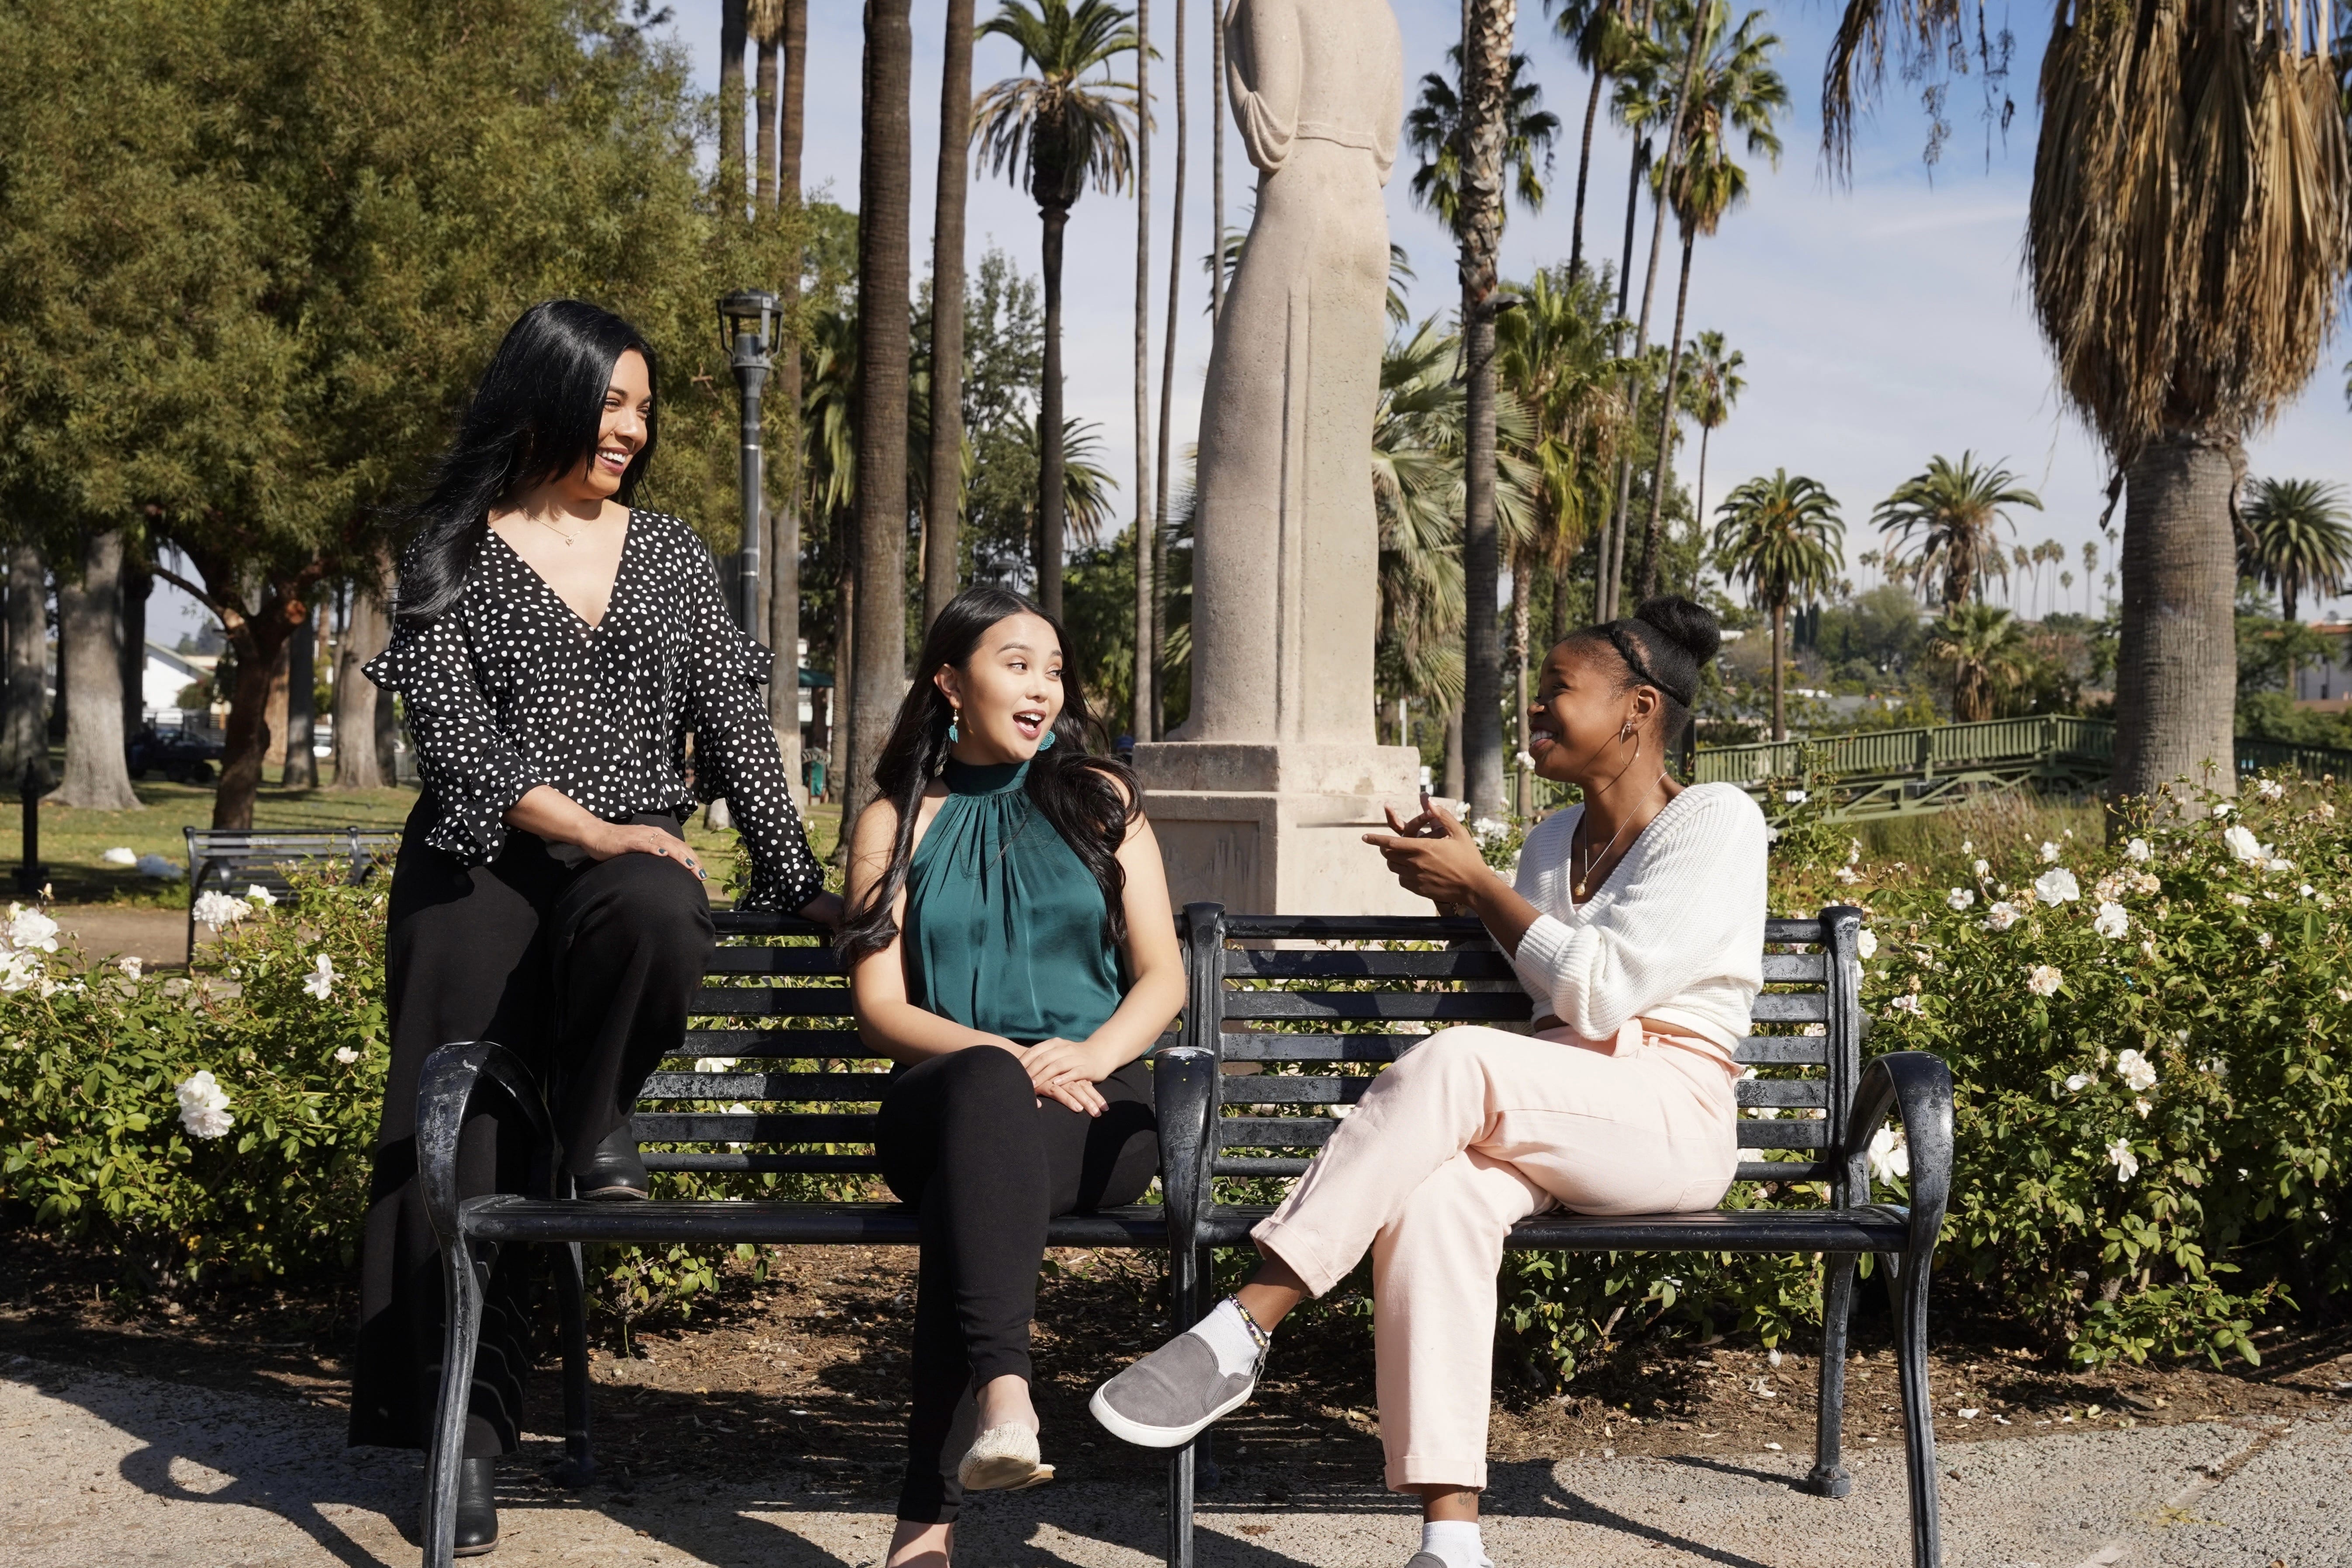 Stella Nova's Los Angeles therapists relaxing together on a bench in Echo Park.